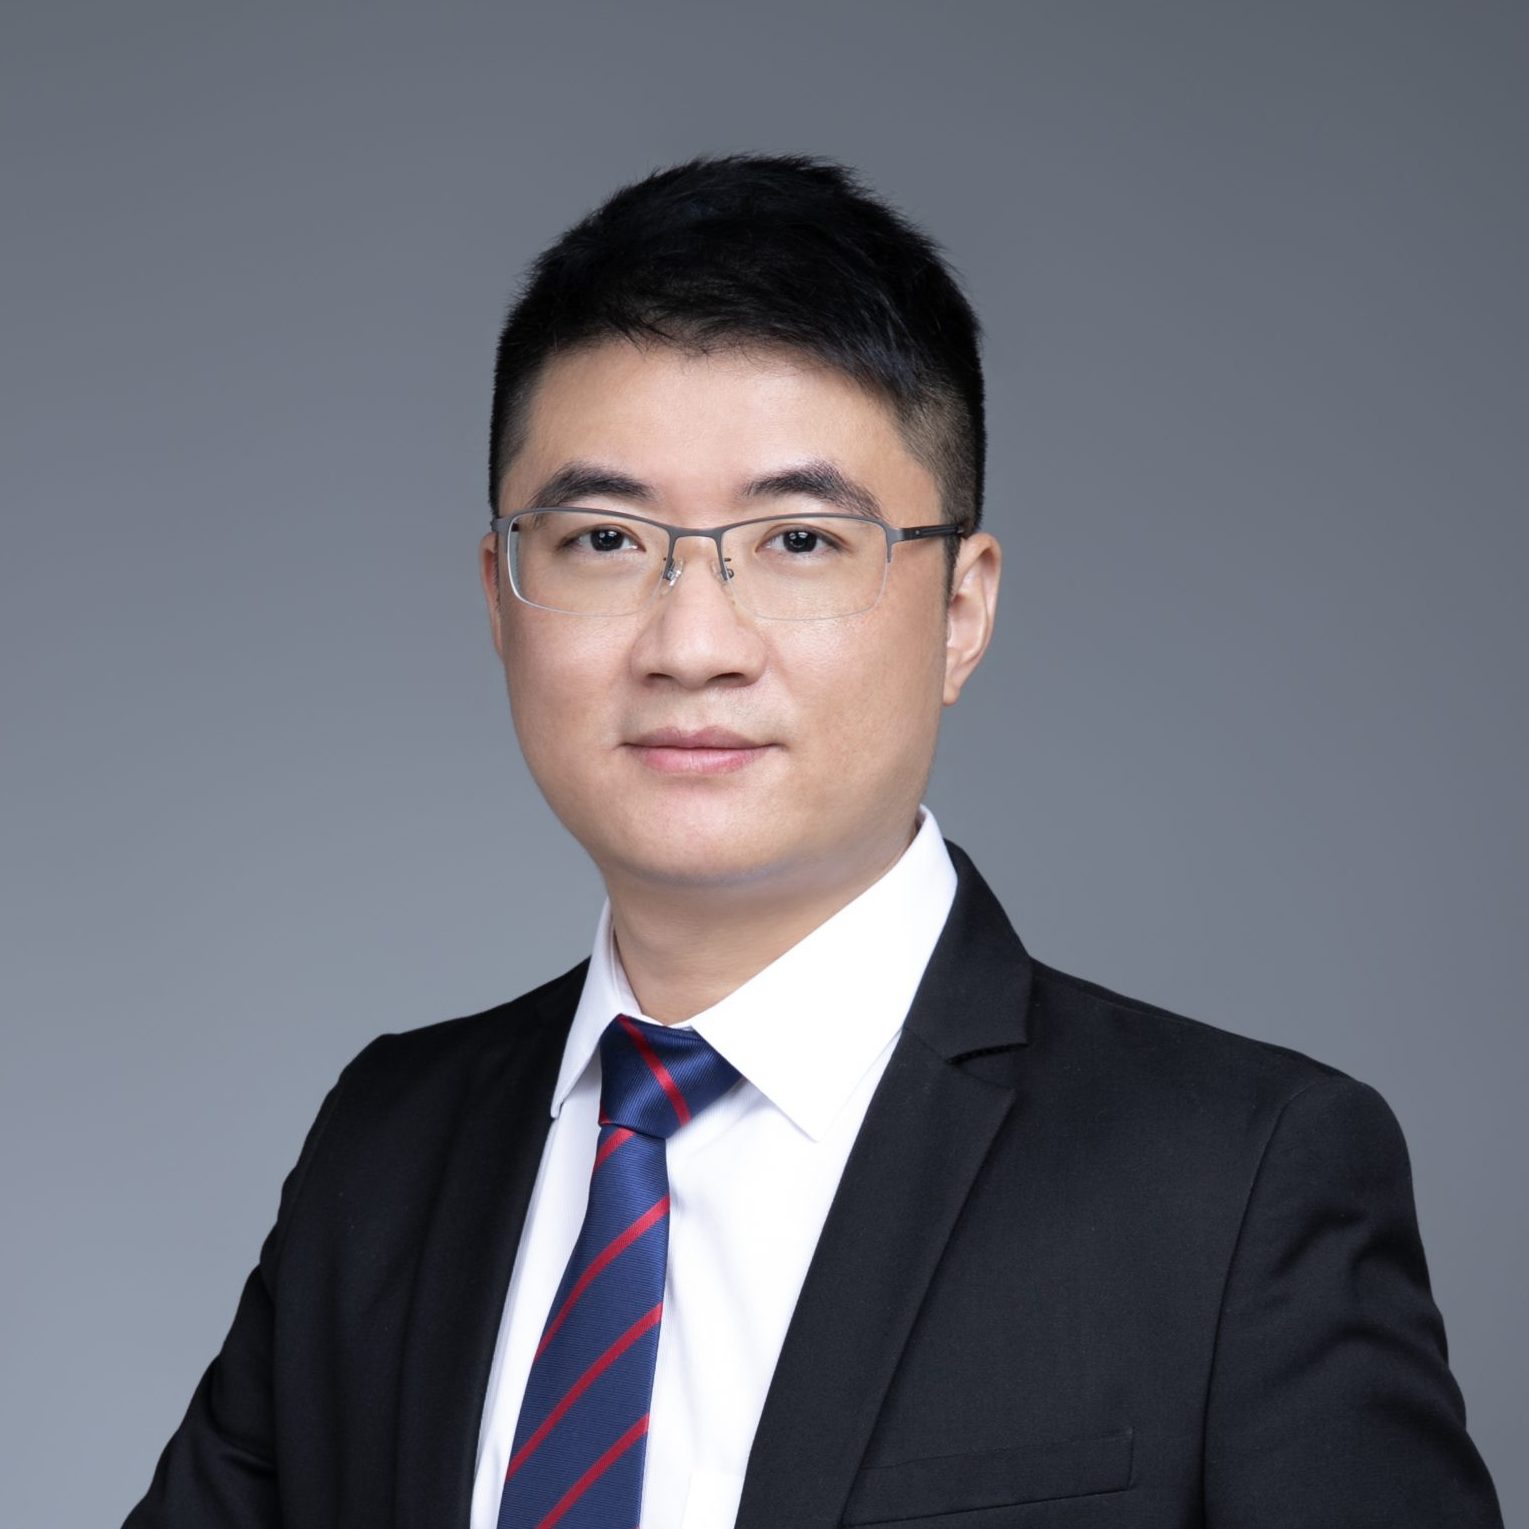 Dr. LIU Yaping, <br> Assistant Professor (non-clinical)